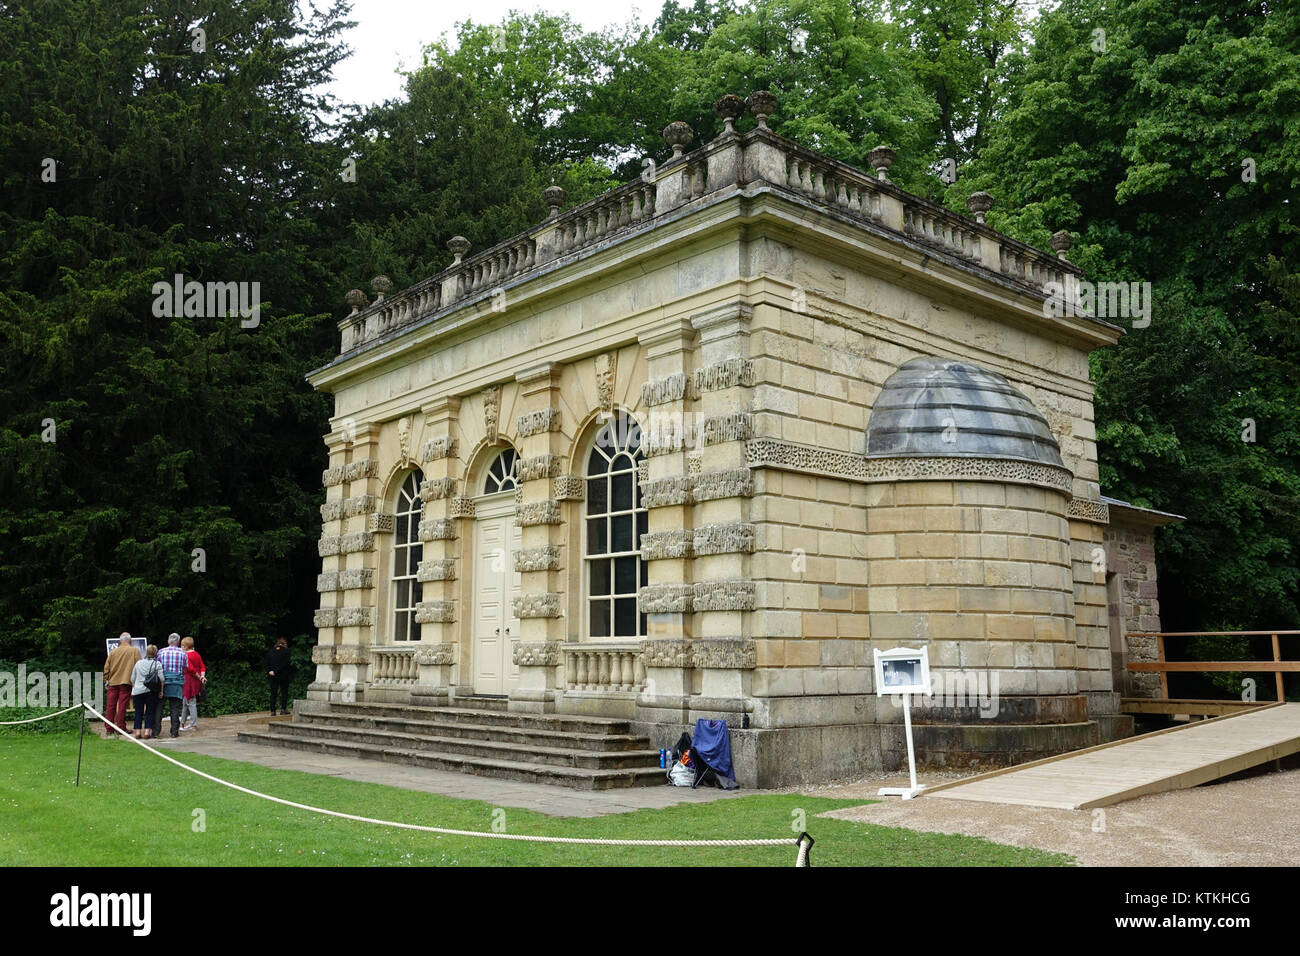 Banqueting House, Studley Royal Park   North Yorkshire, England   DSC00721 Stock Photo